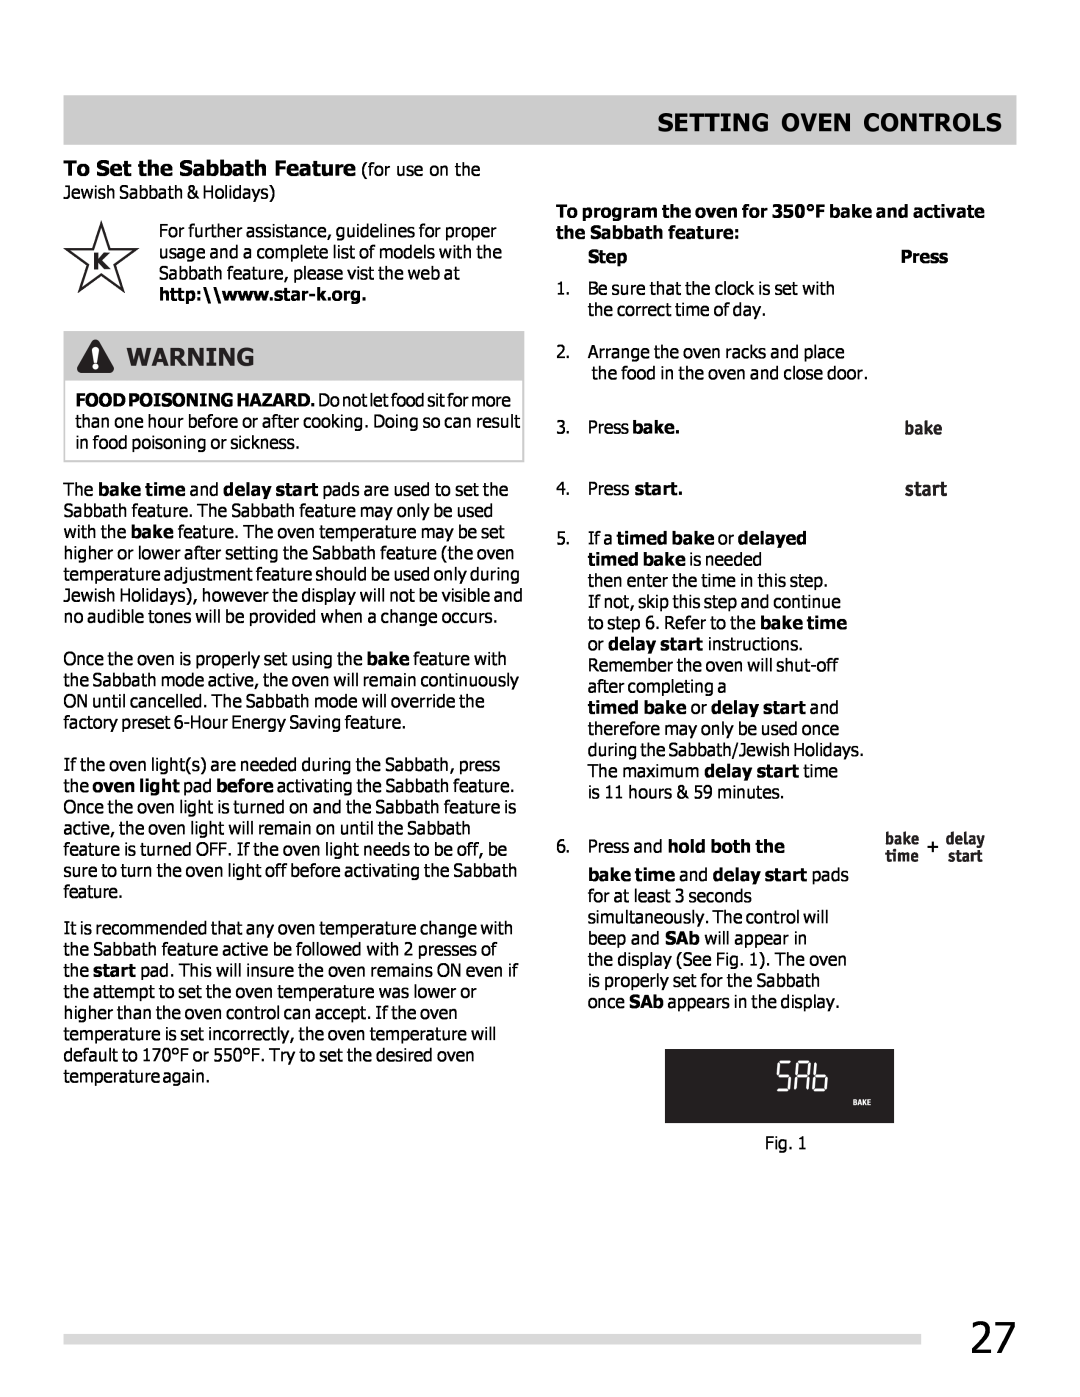 Frigidaire 316902202 important safety instructions To Set the Sabbath Feature for use on the, Setting Oven Controls 